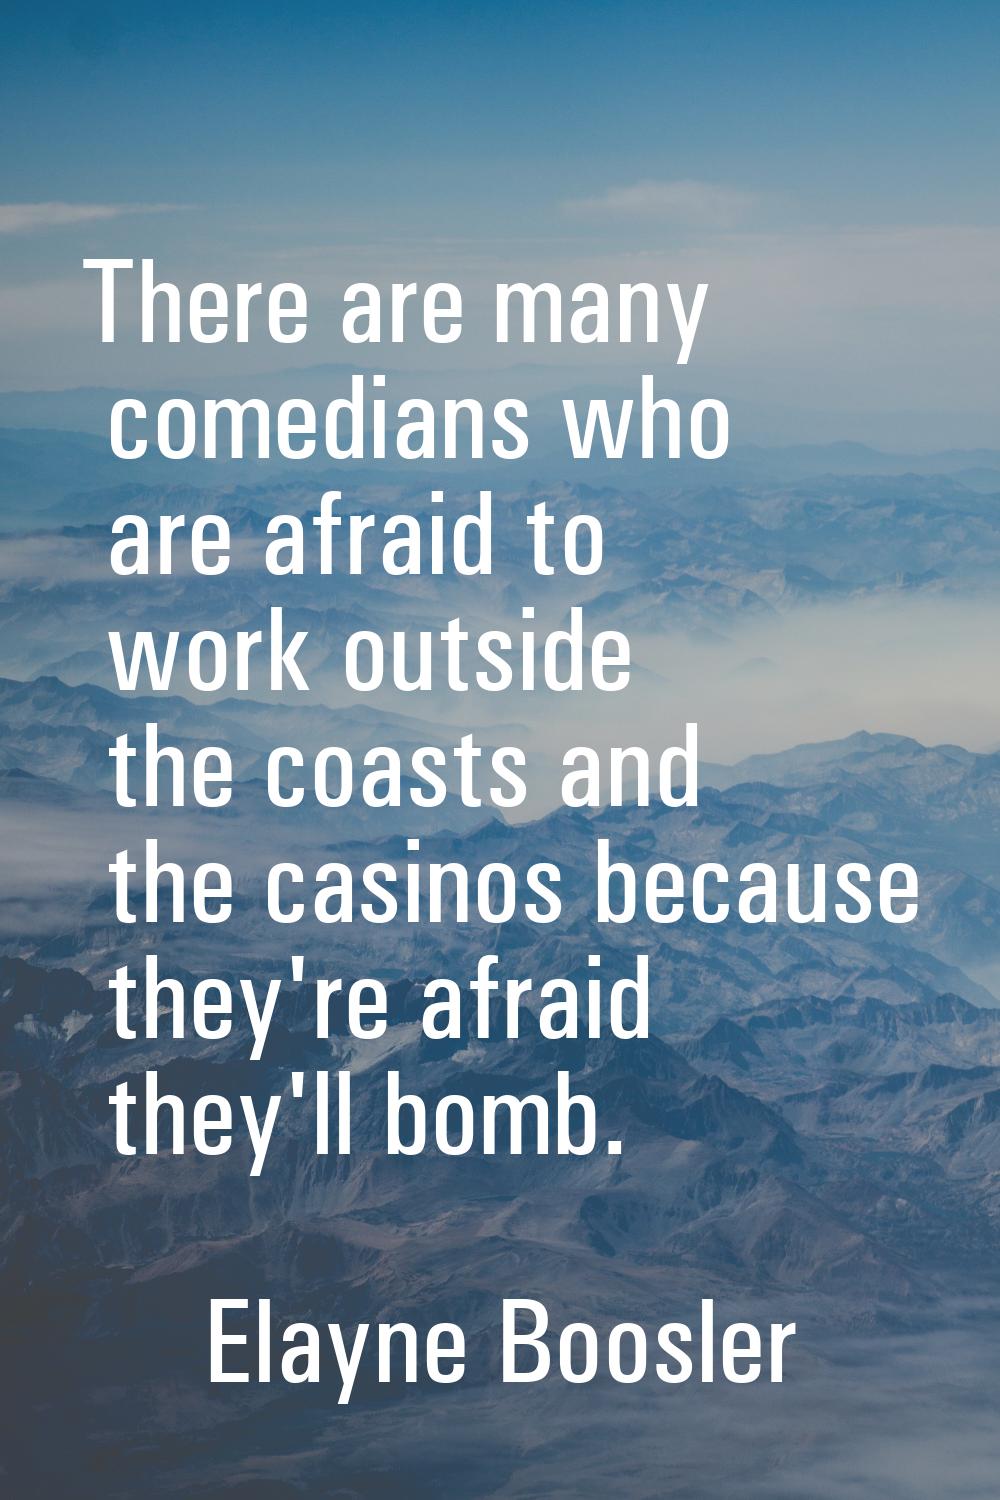 There are many comedians who are afraid to work outside the coasts and the casinos because they're 